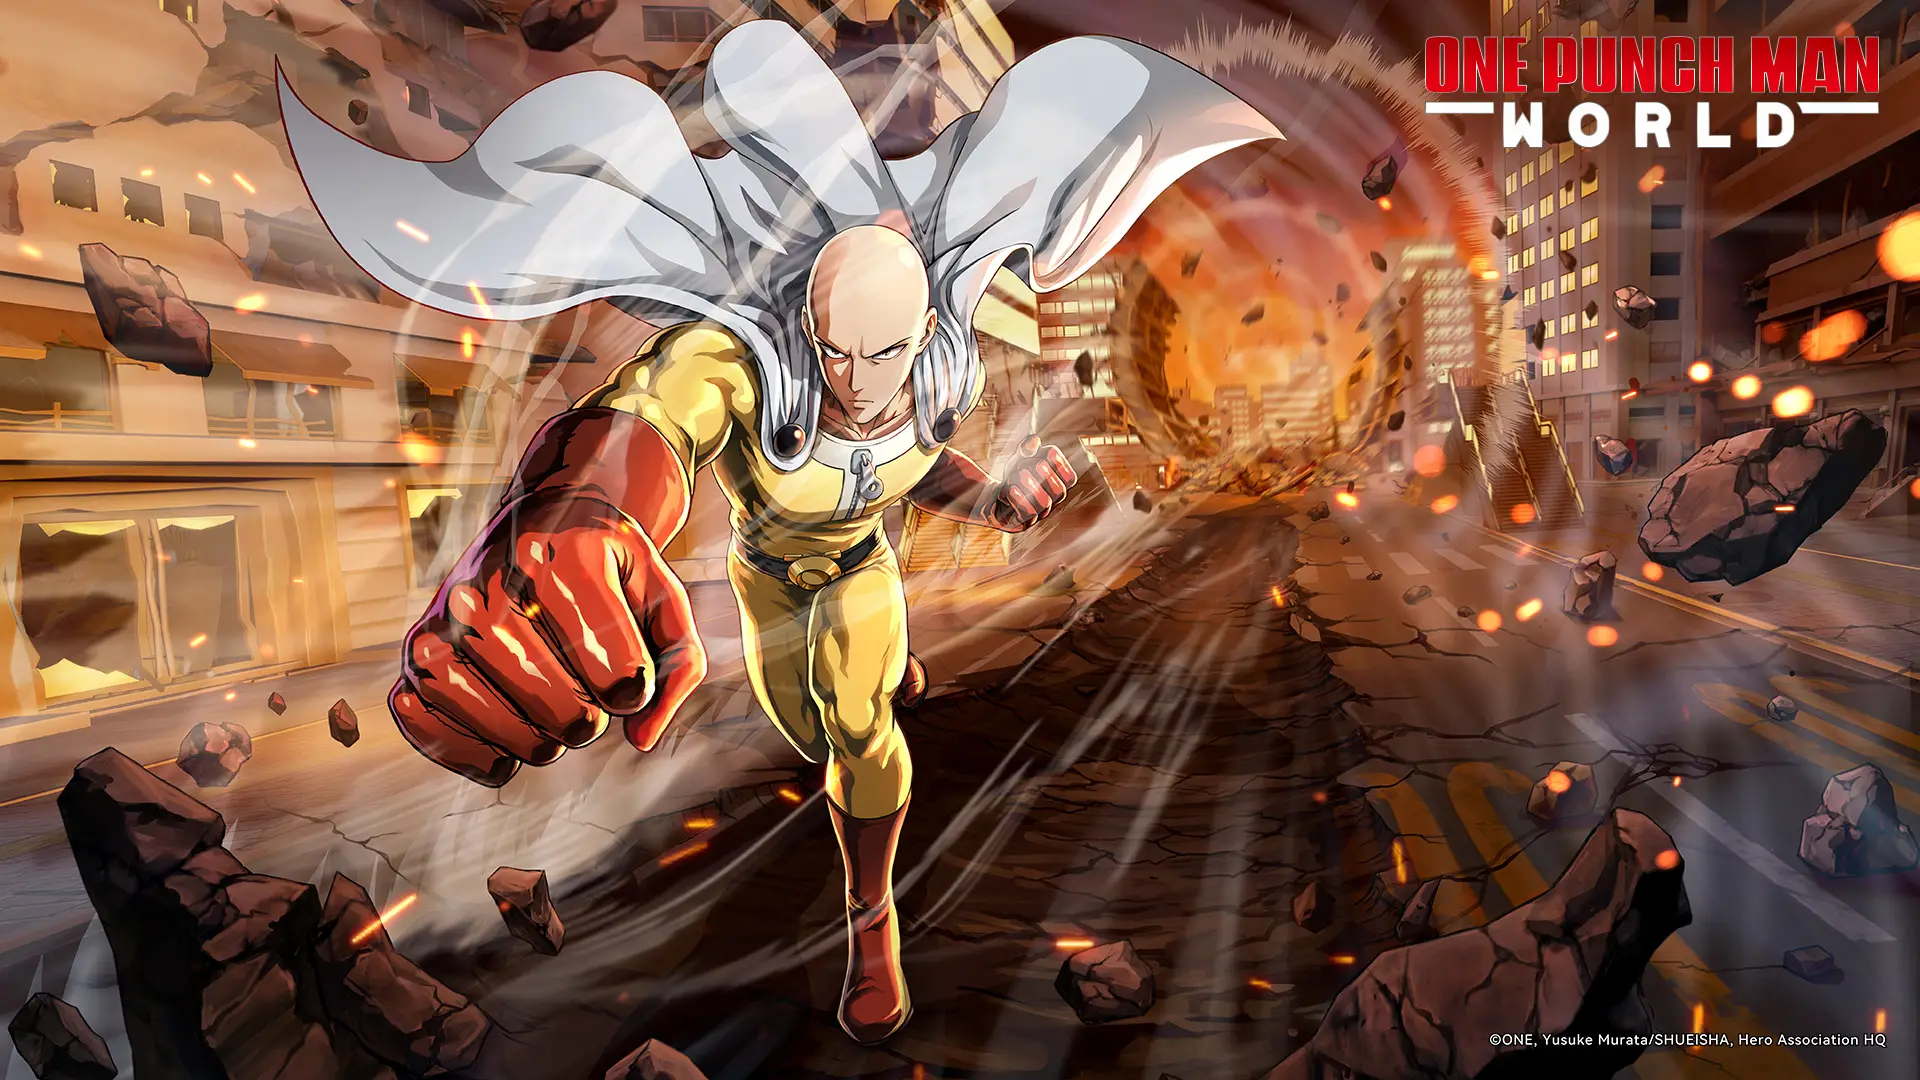 The trailer for the new free One-Punch Man game has been released